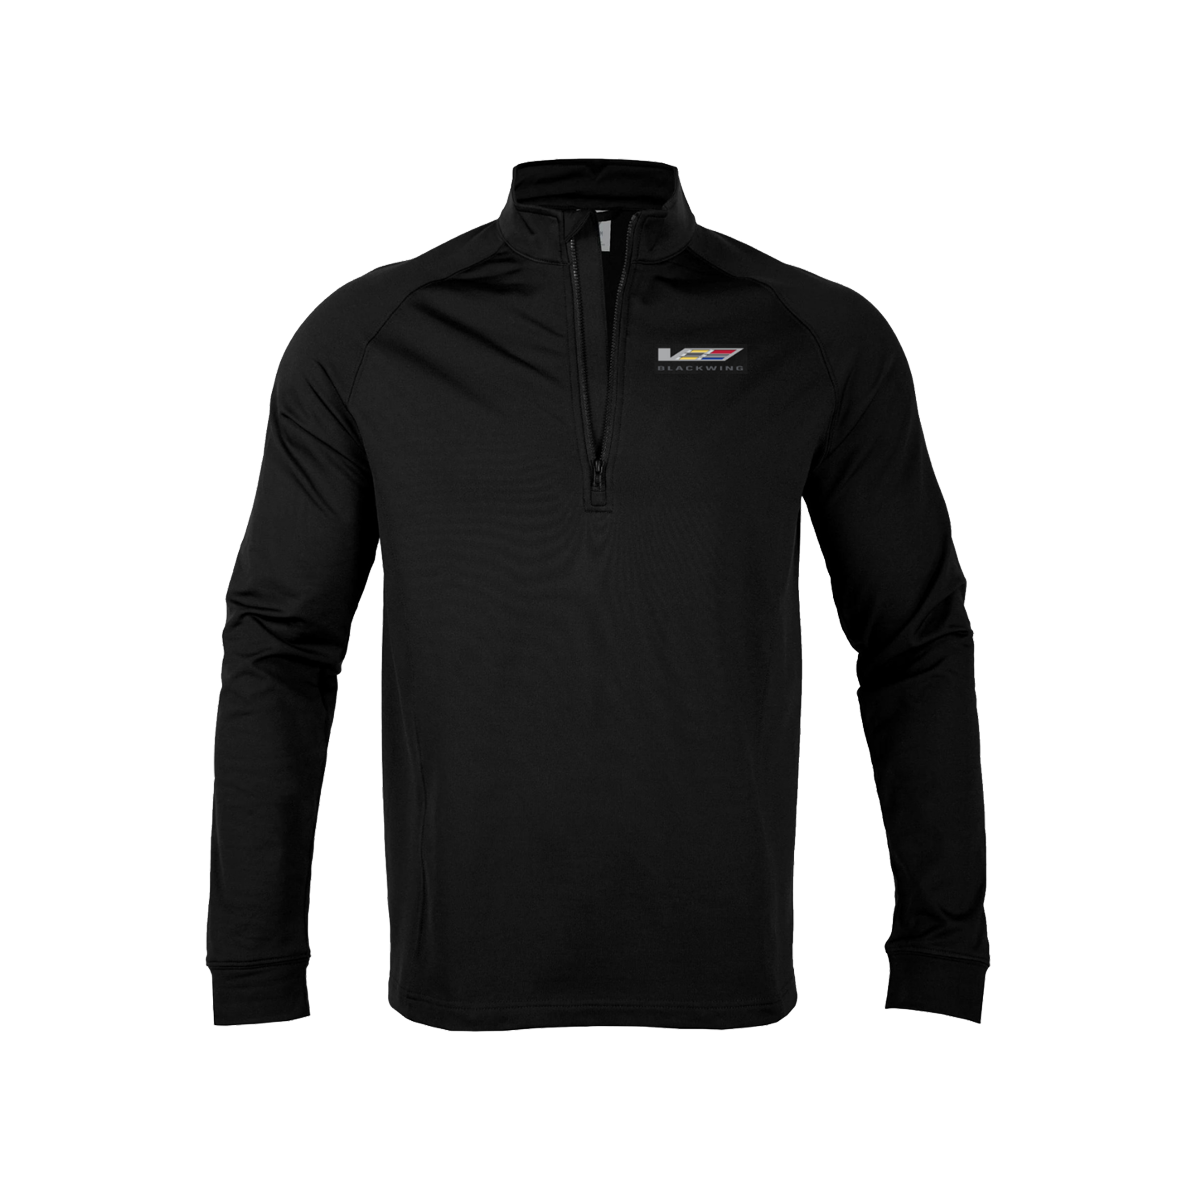 Cadillac Blackwing Calibre Men's 1/4 Zip by Levelwear